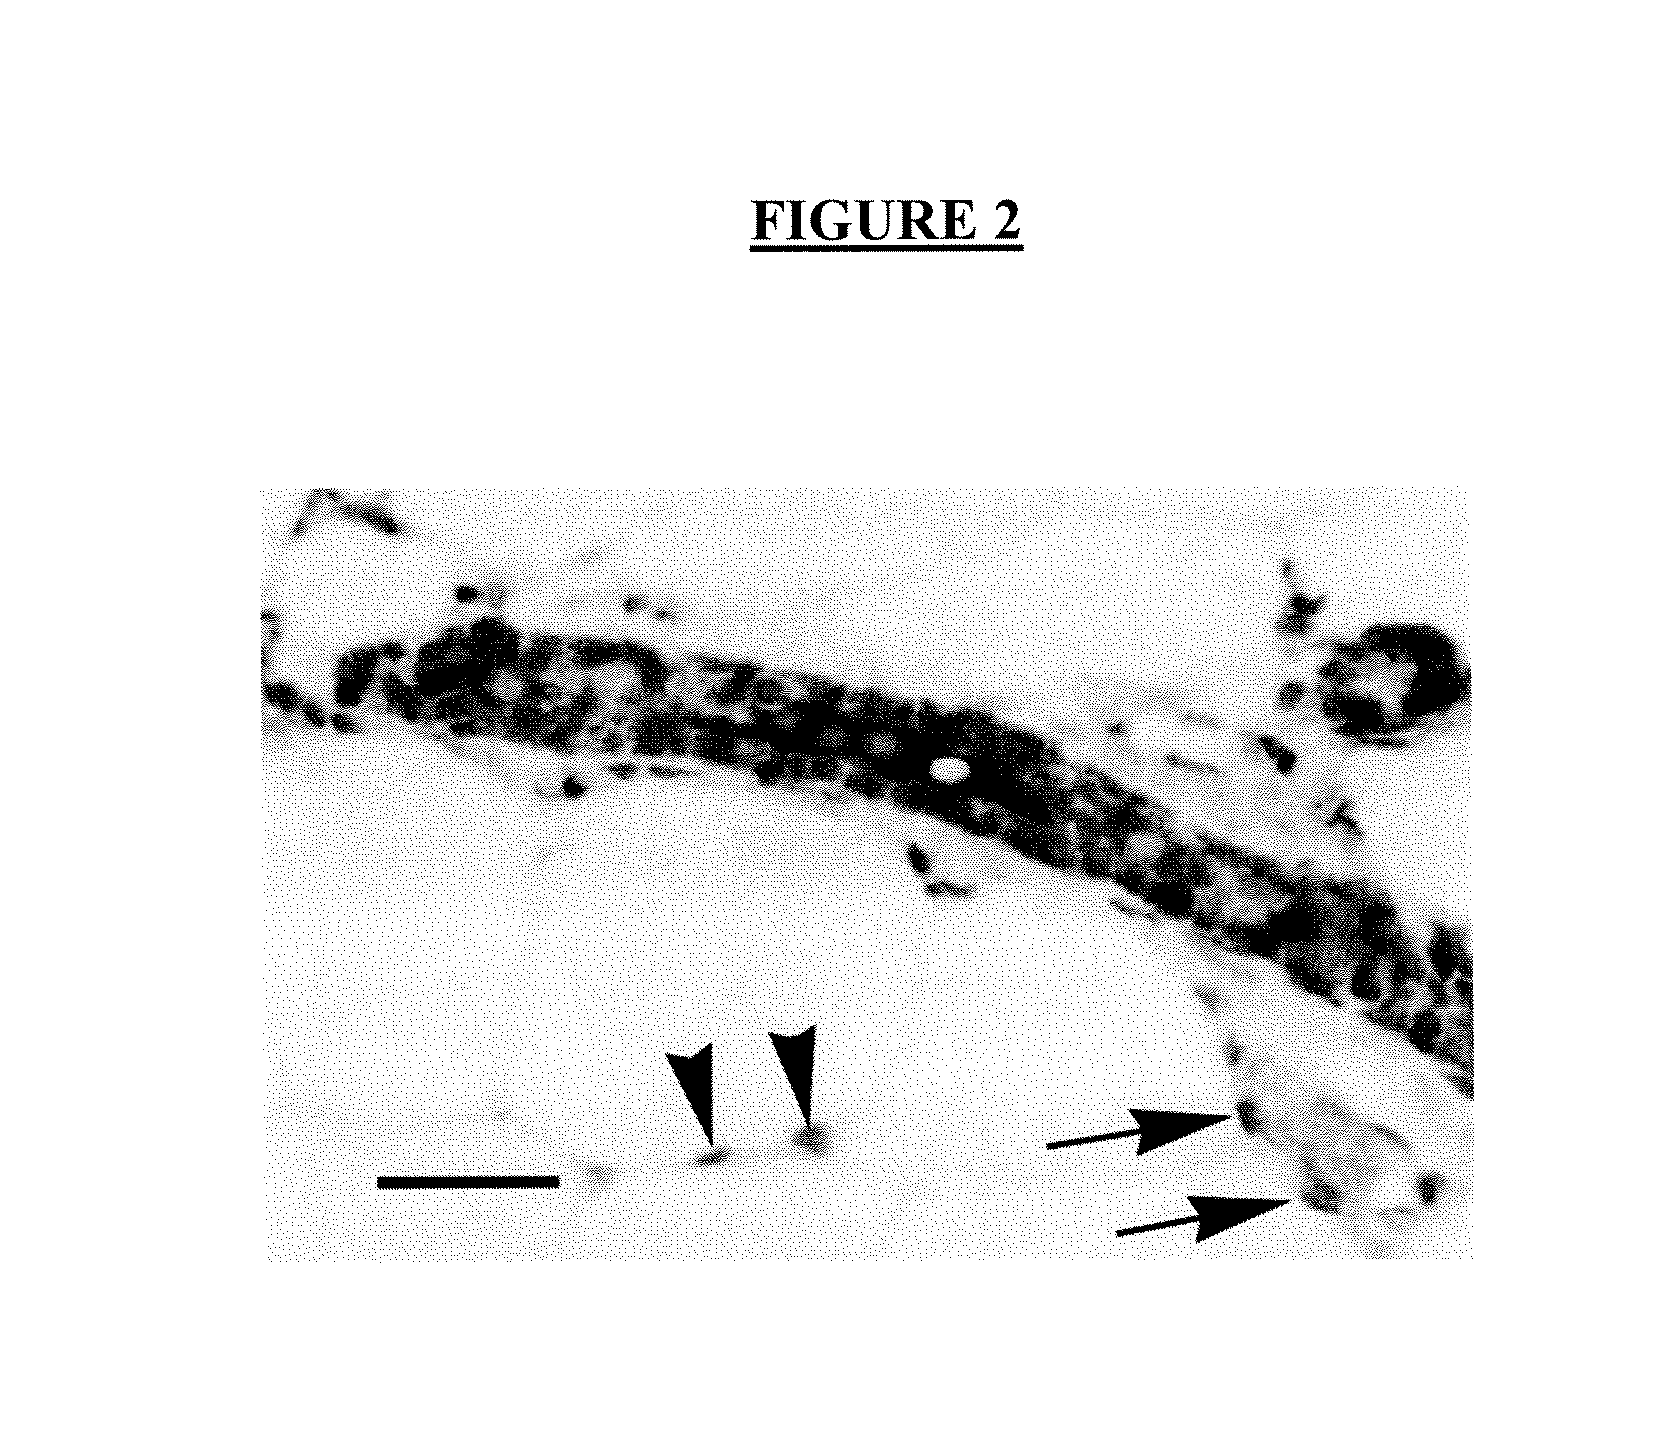 Method for the Discrimination and Isolation of Mammary Epithelial Stem and Colony-Forming Cells